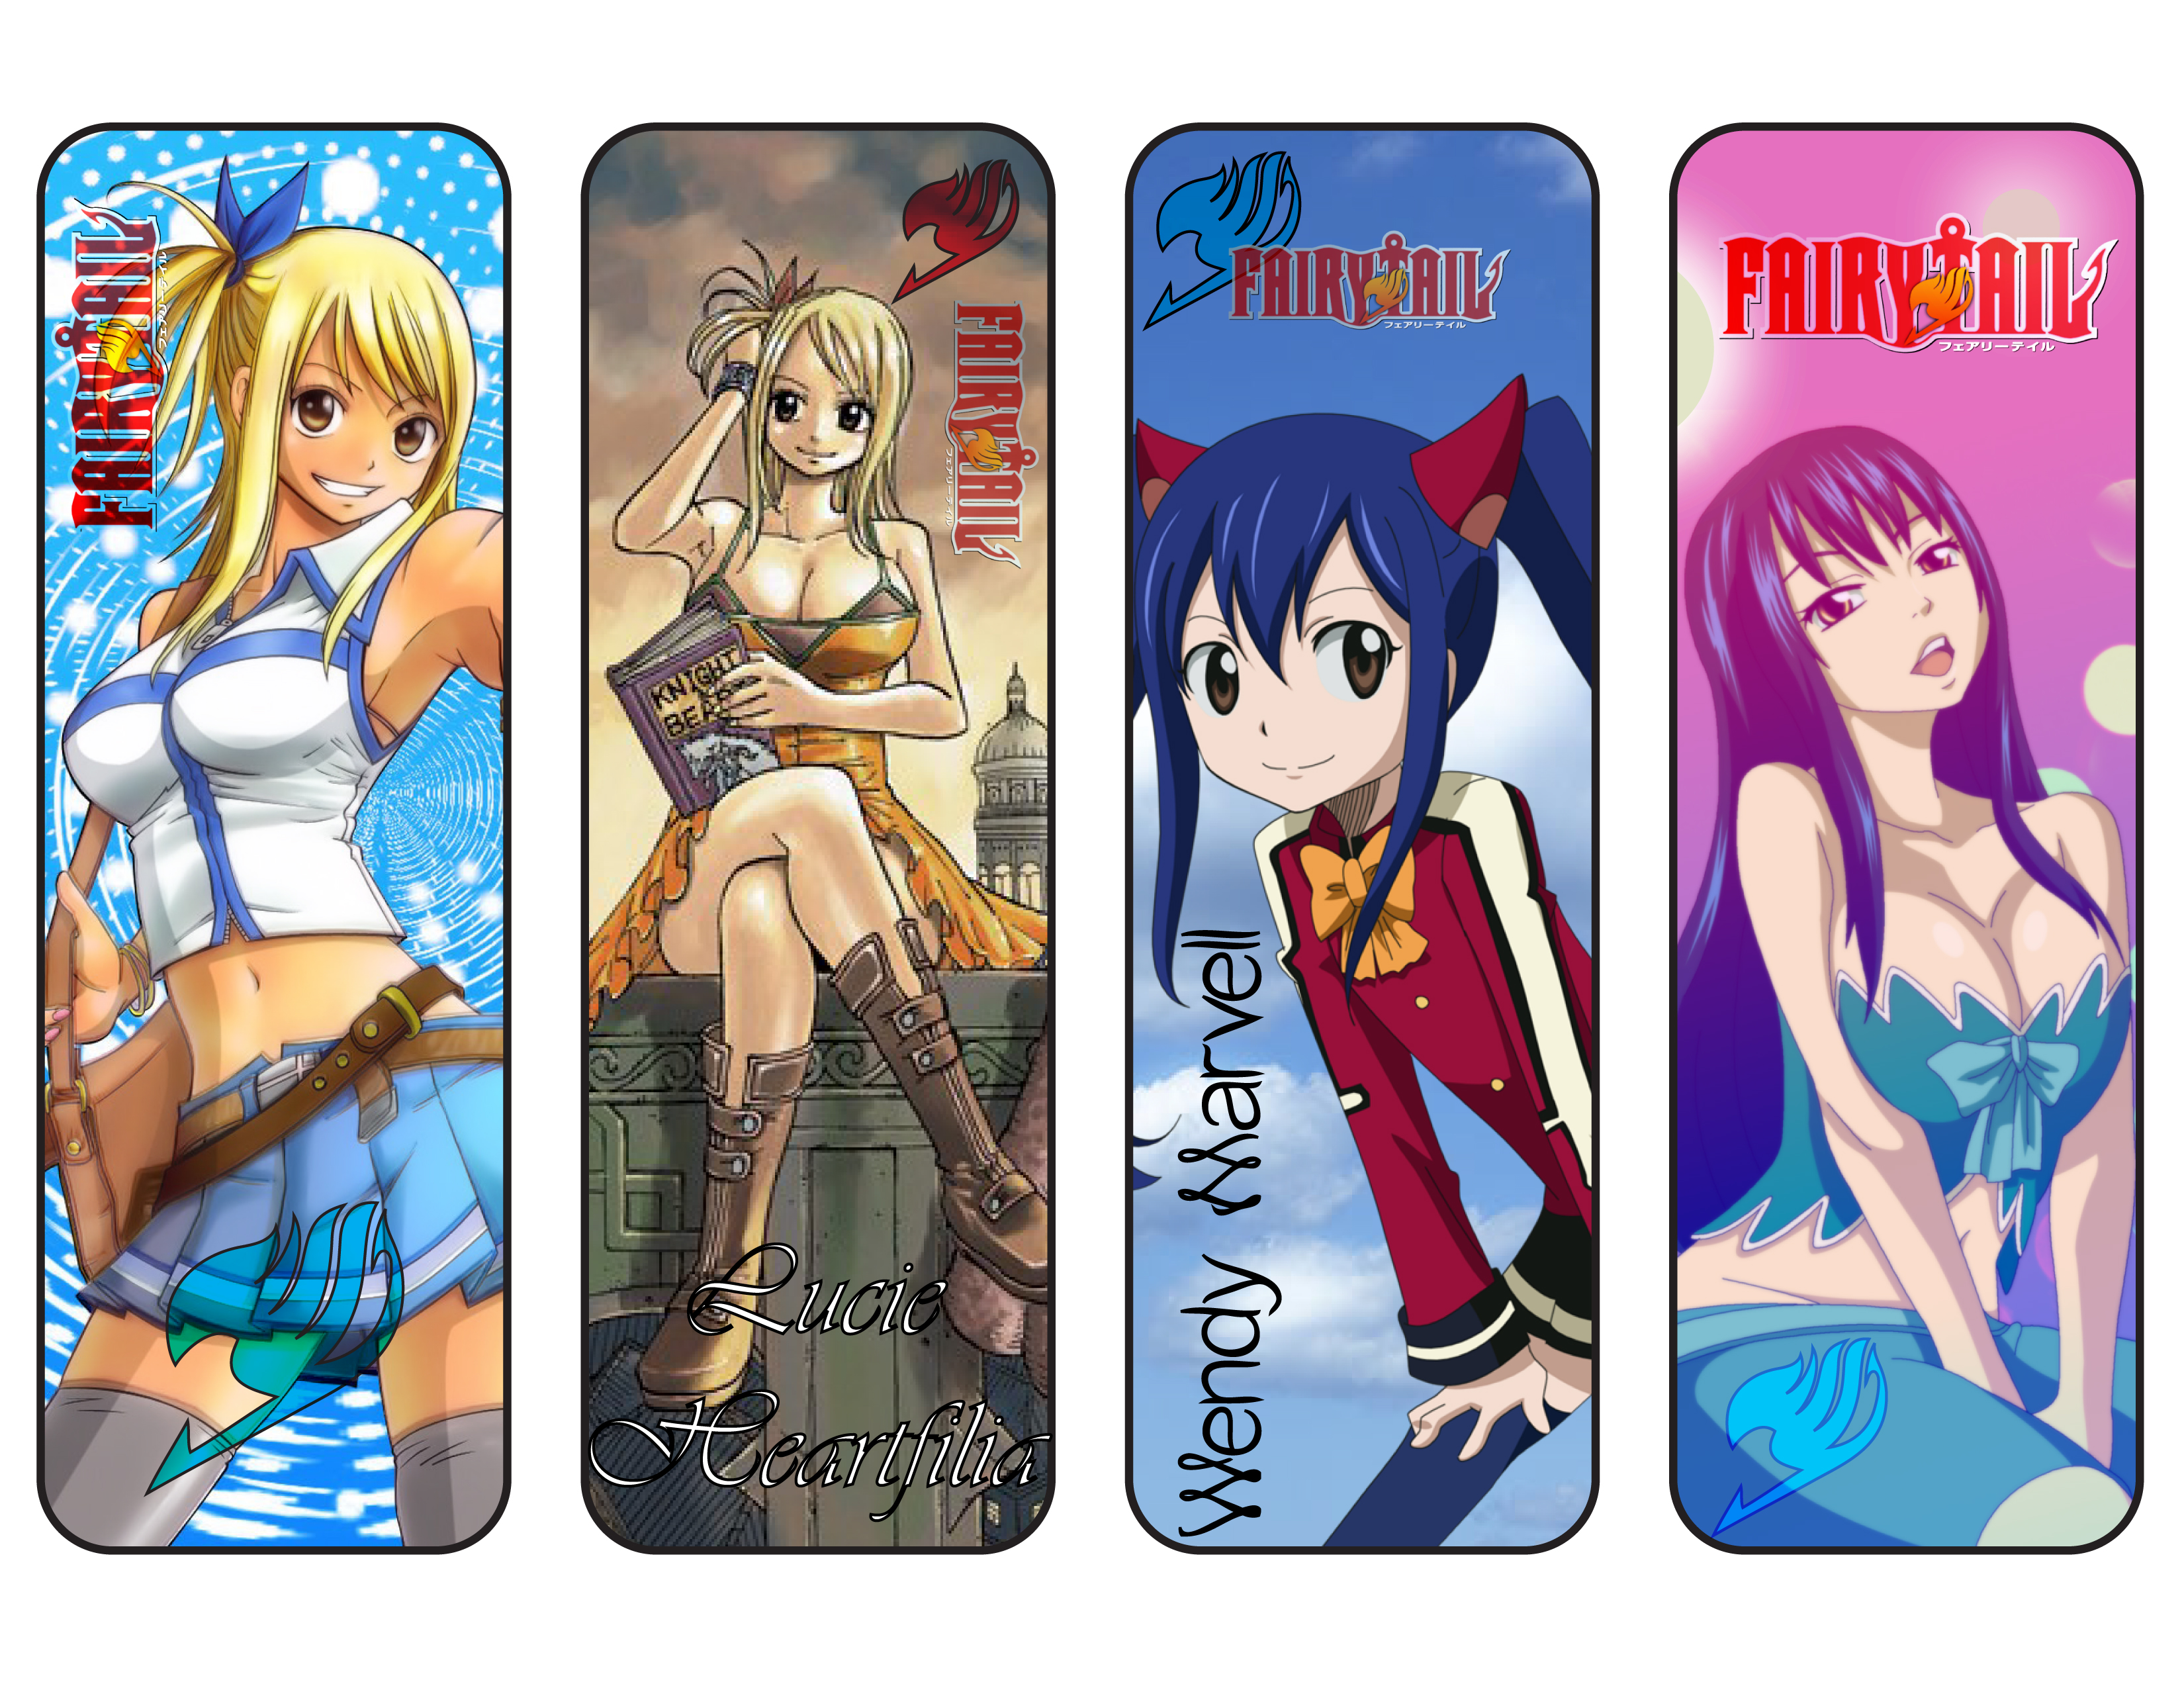 Fairy Tail Bookmarks Lucie / Wendy by MalcoLXX on DeviantArt